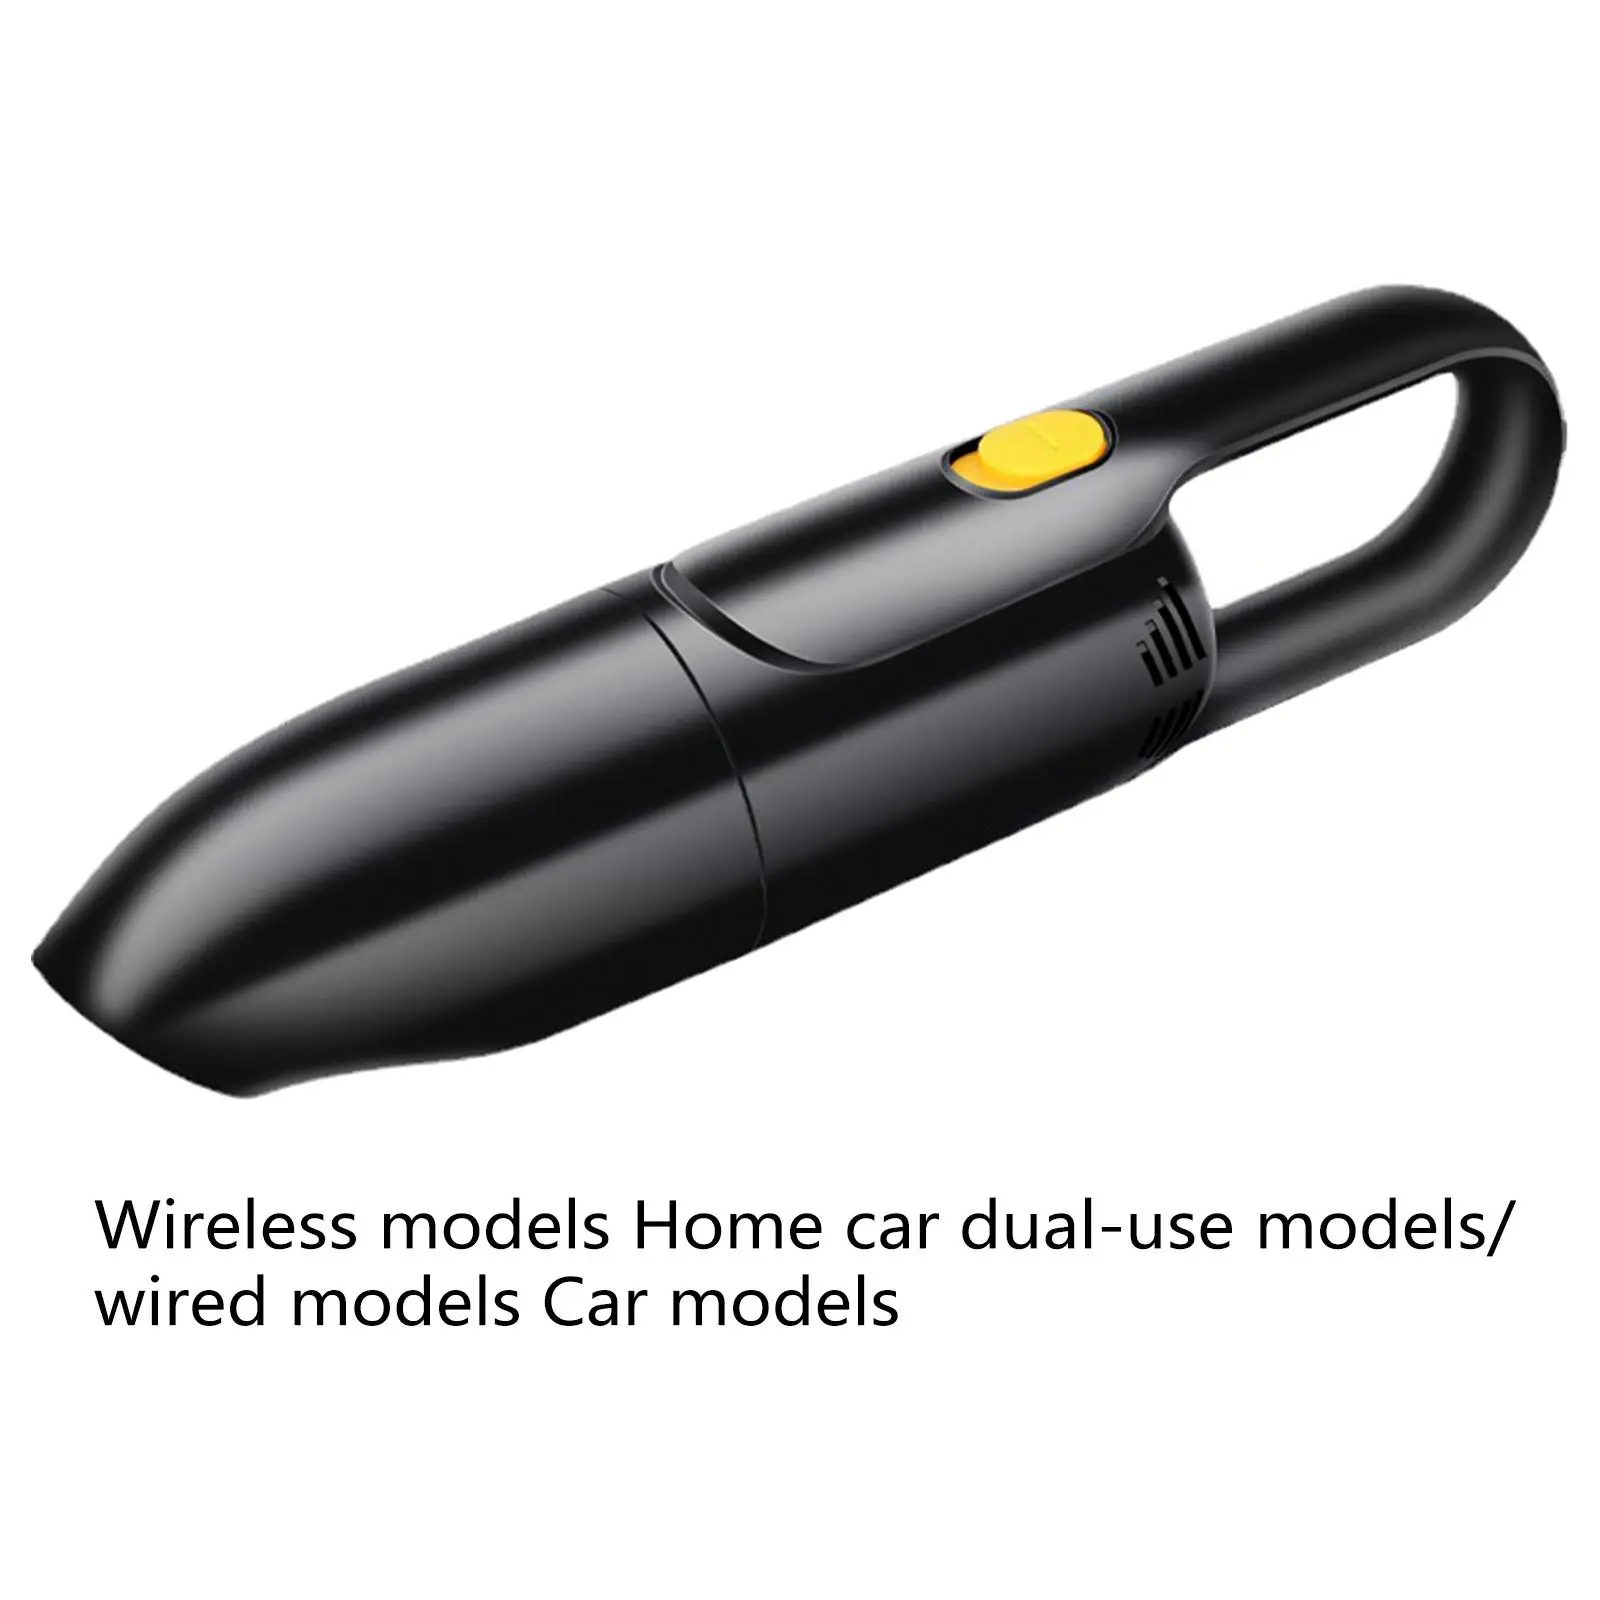 Portable Mini Vacuum Cleaner with Filter Car Vacuum Cleaner Fit for Pet Hair Cleaning Home